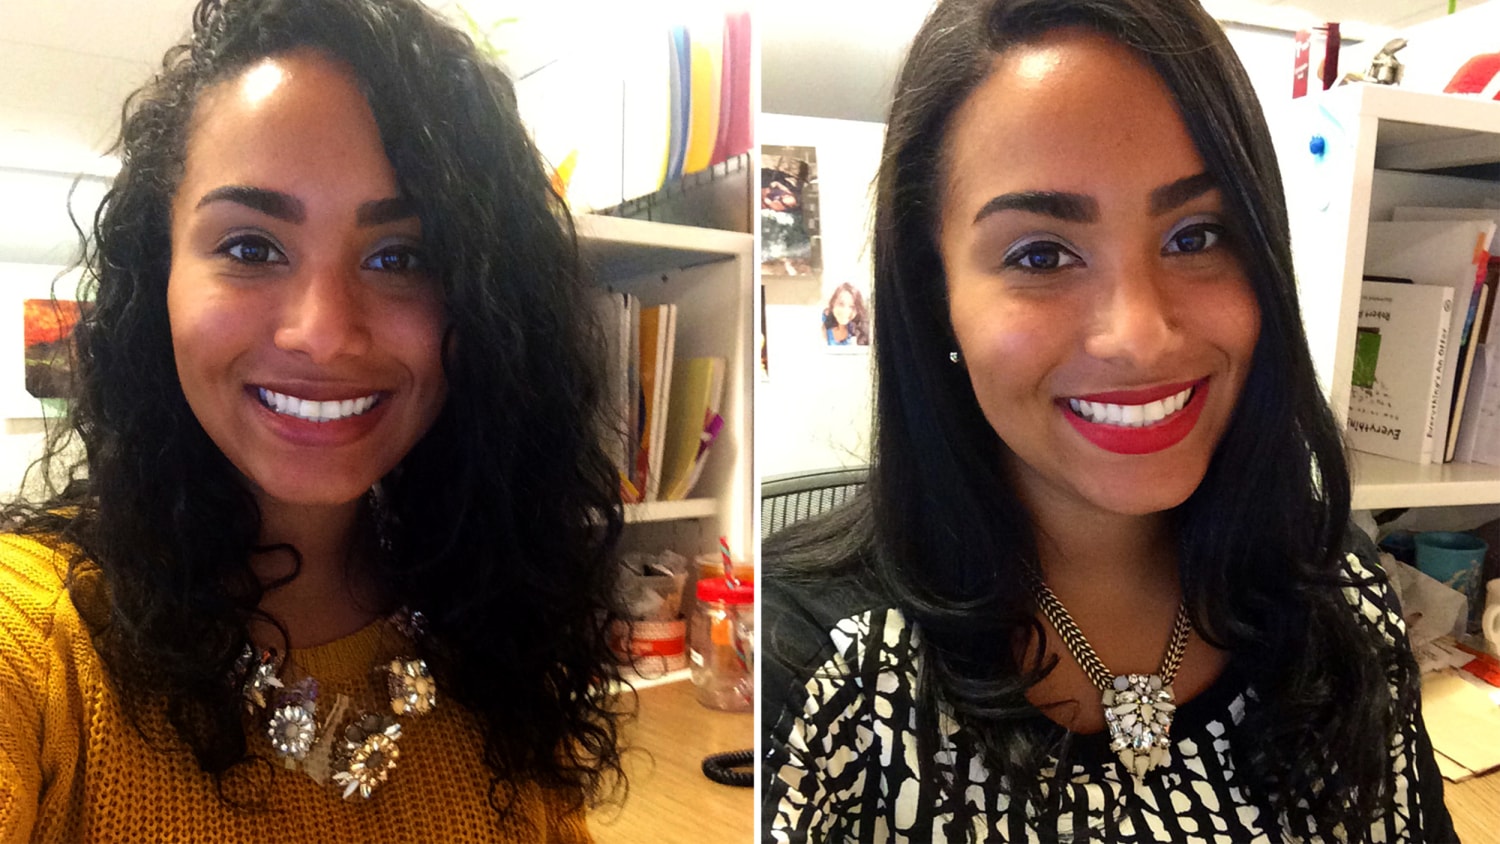 CurlPower: Women switch from curly to straight hairstyles to test reactions